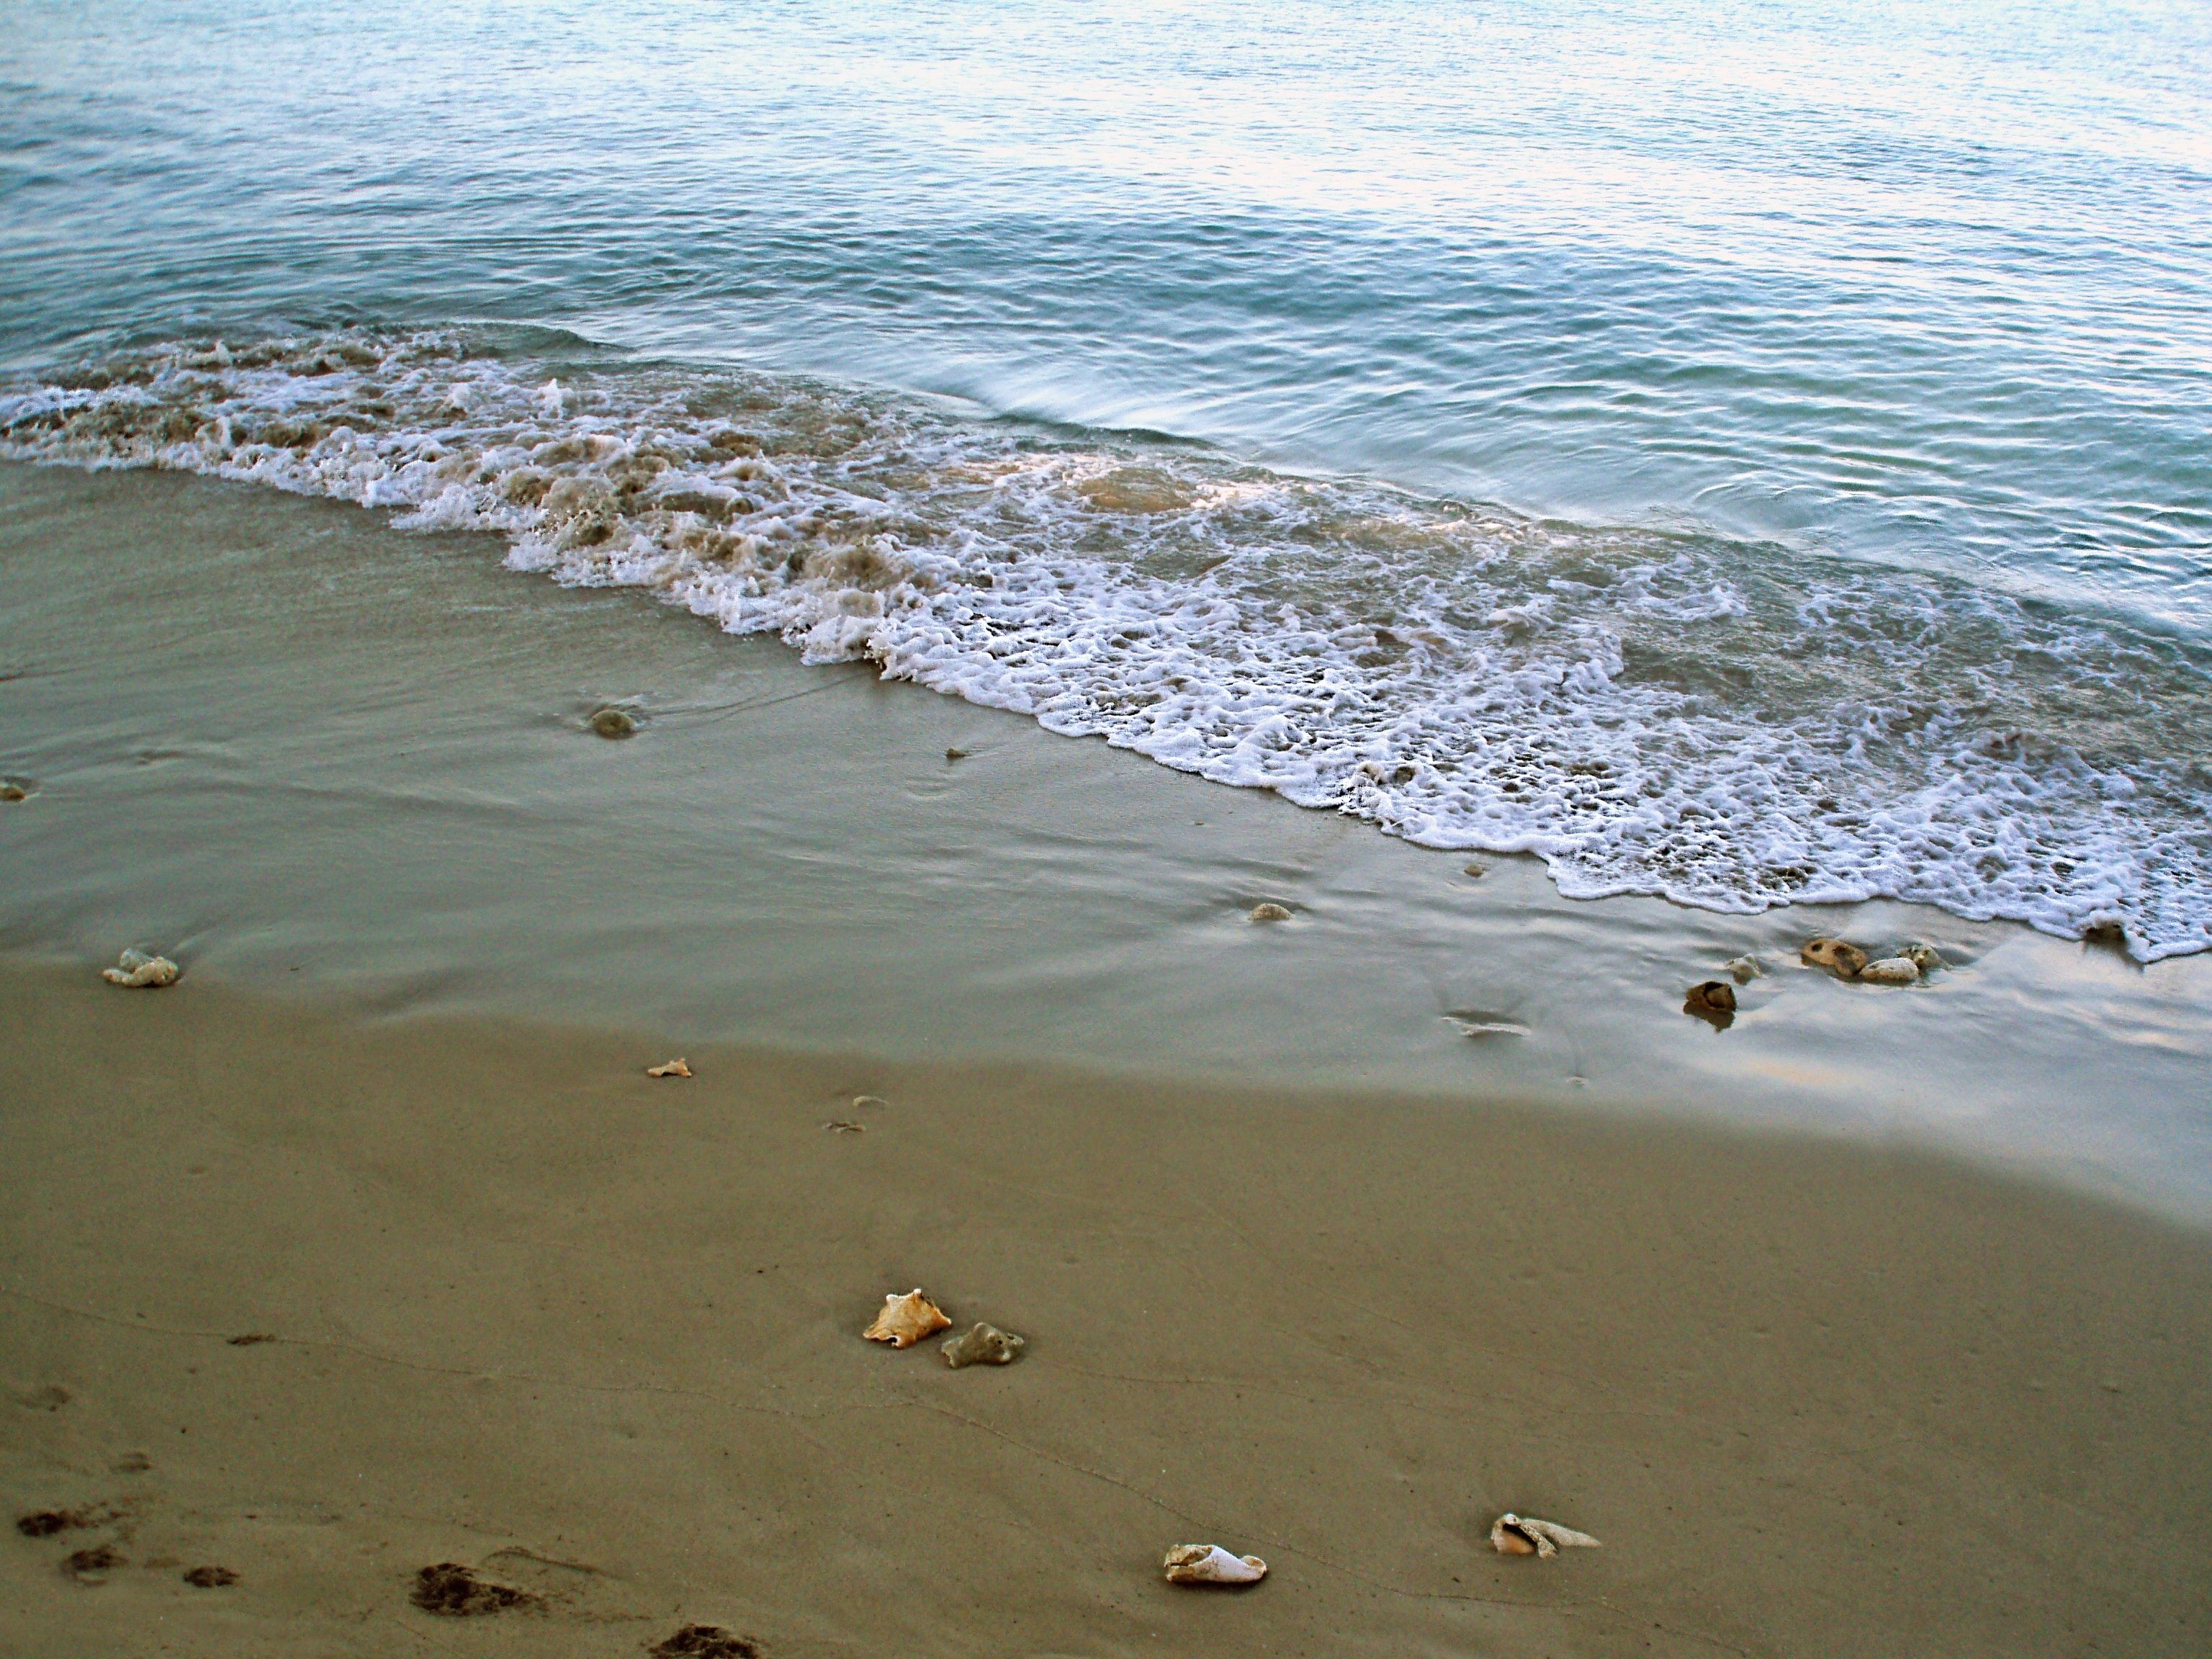 Sea shells are exposed in the sand by receding waves.